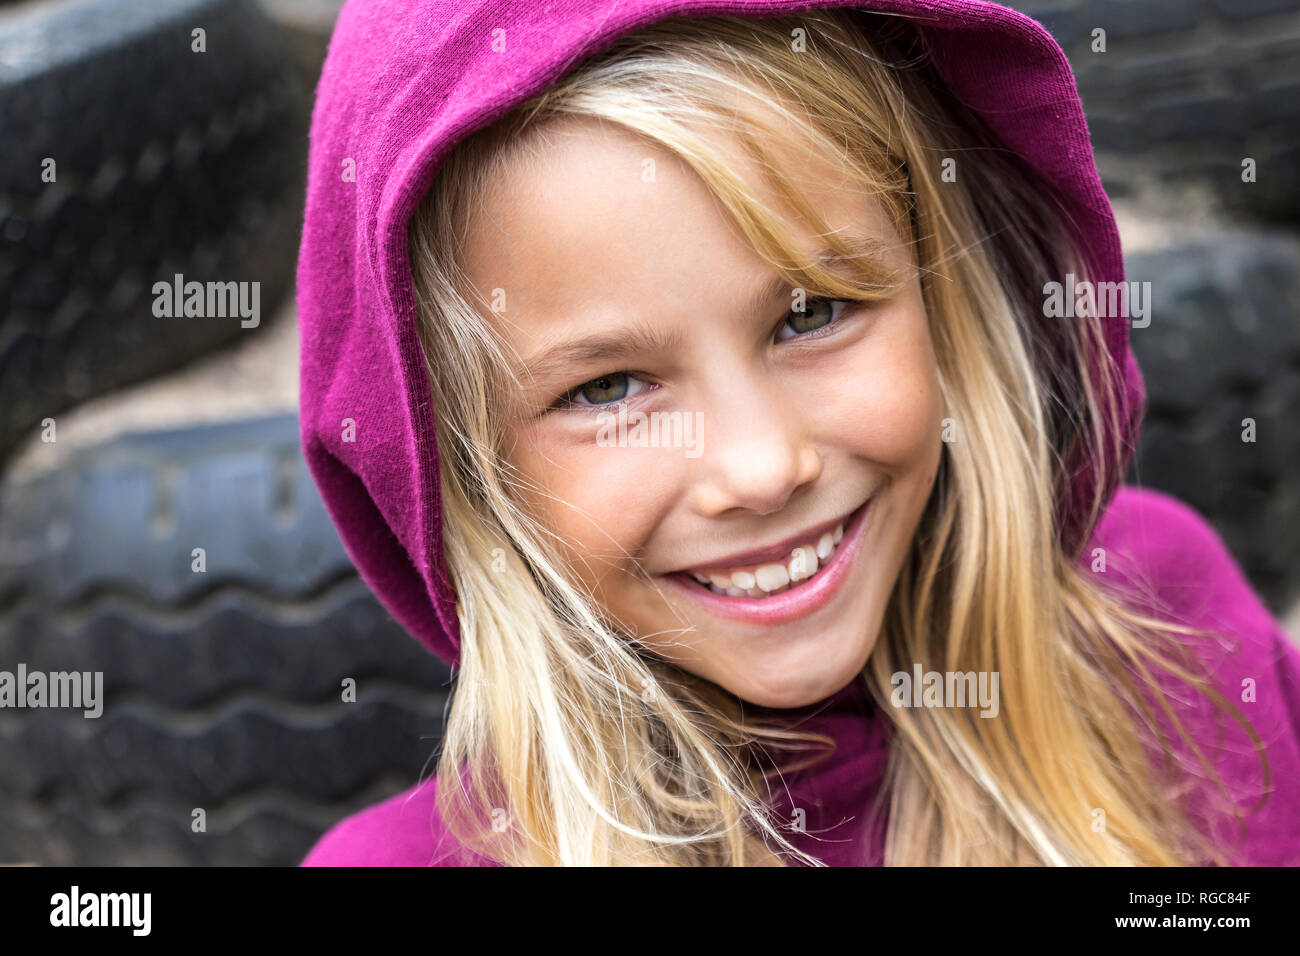 Portrait of smiling blond girl wearing pink hooded jacket Stock Photo